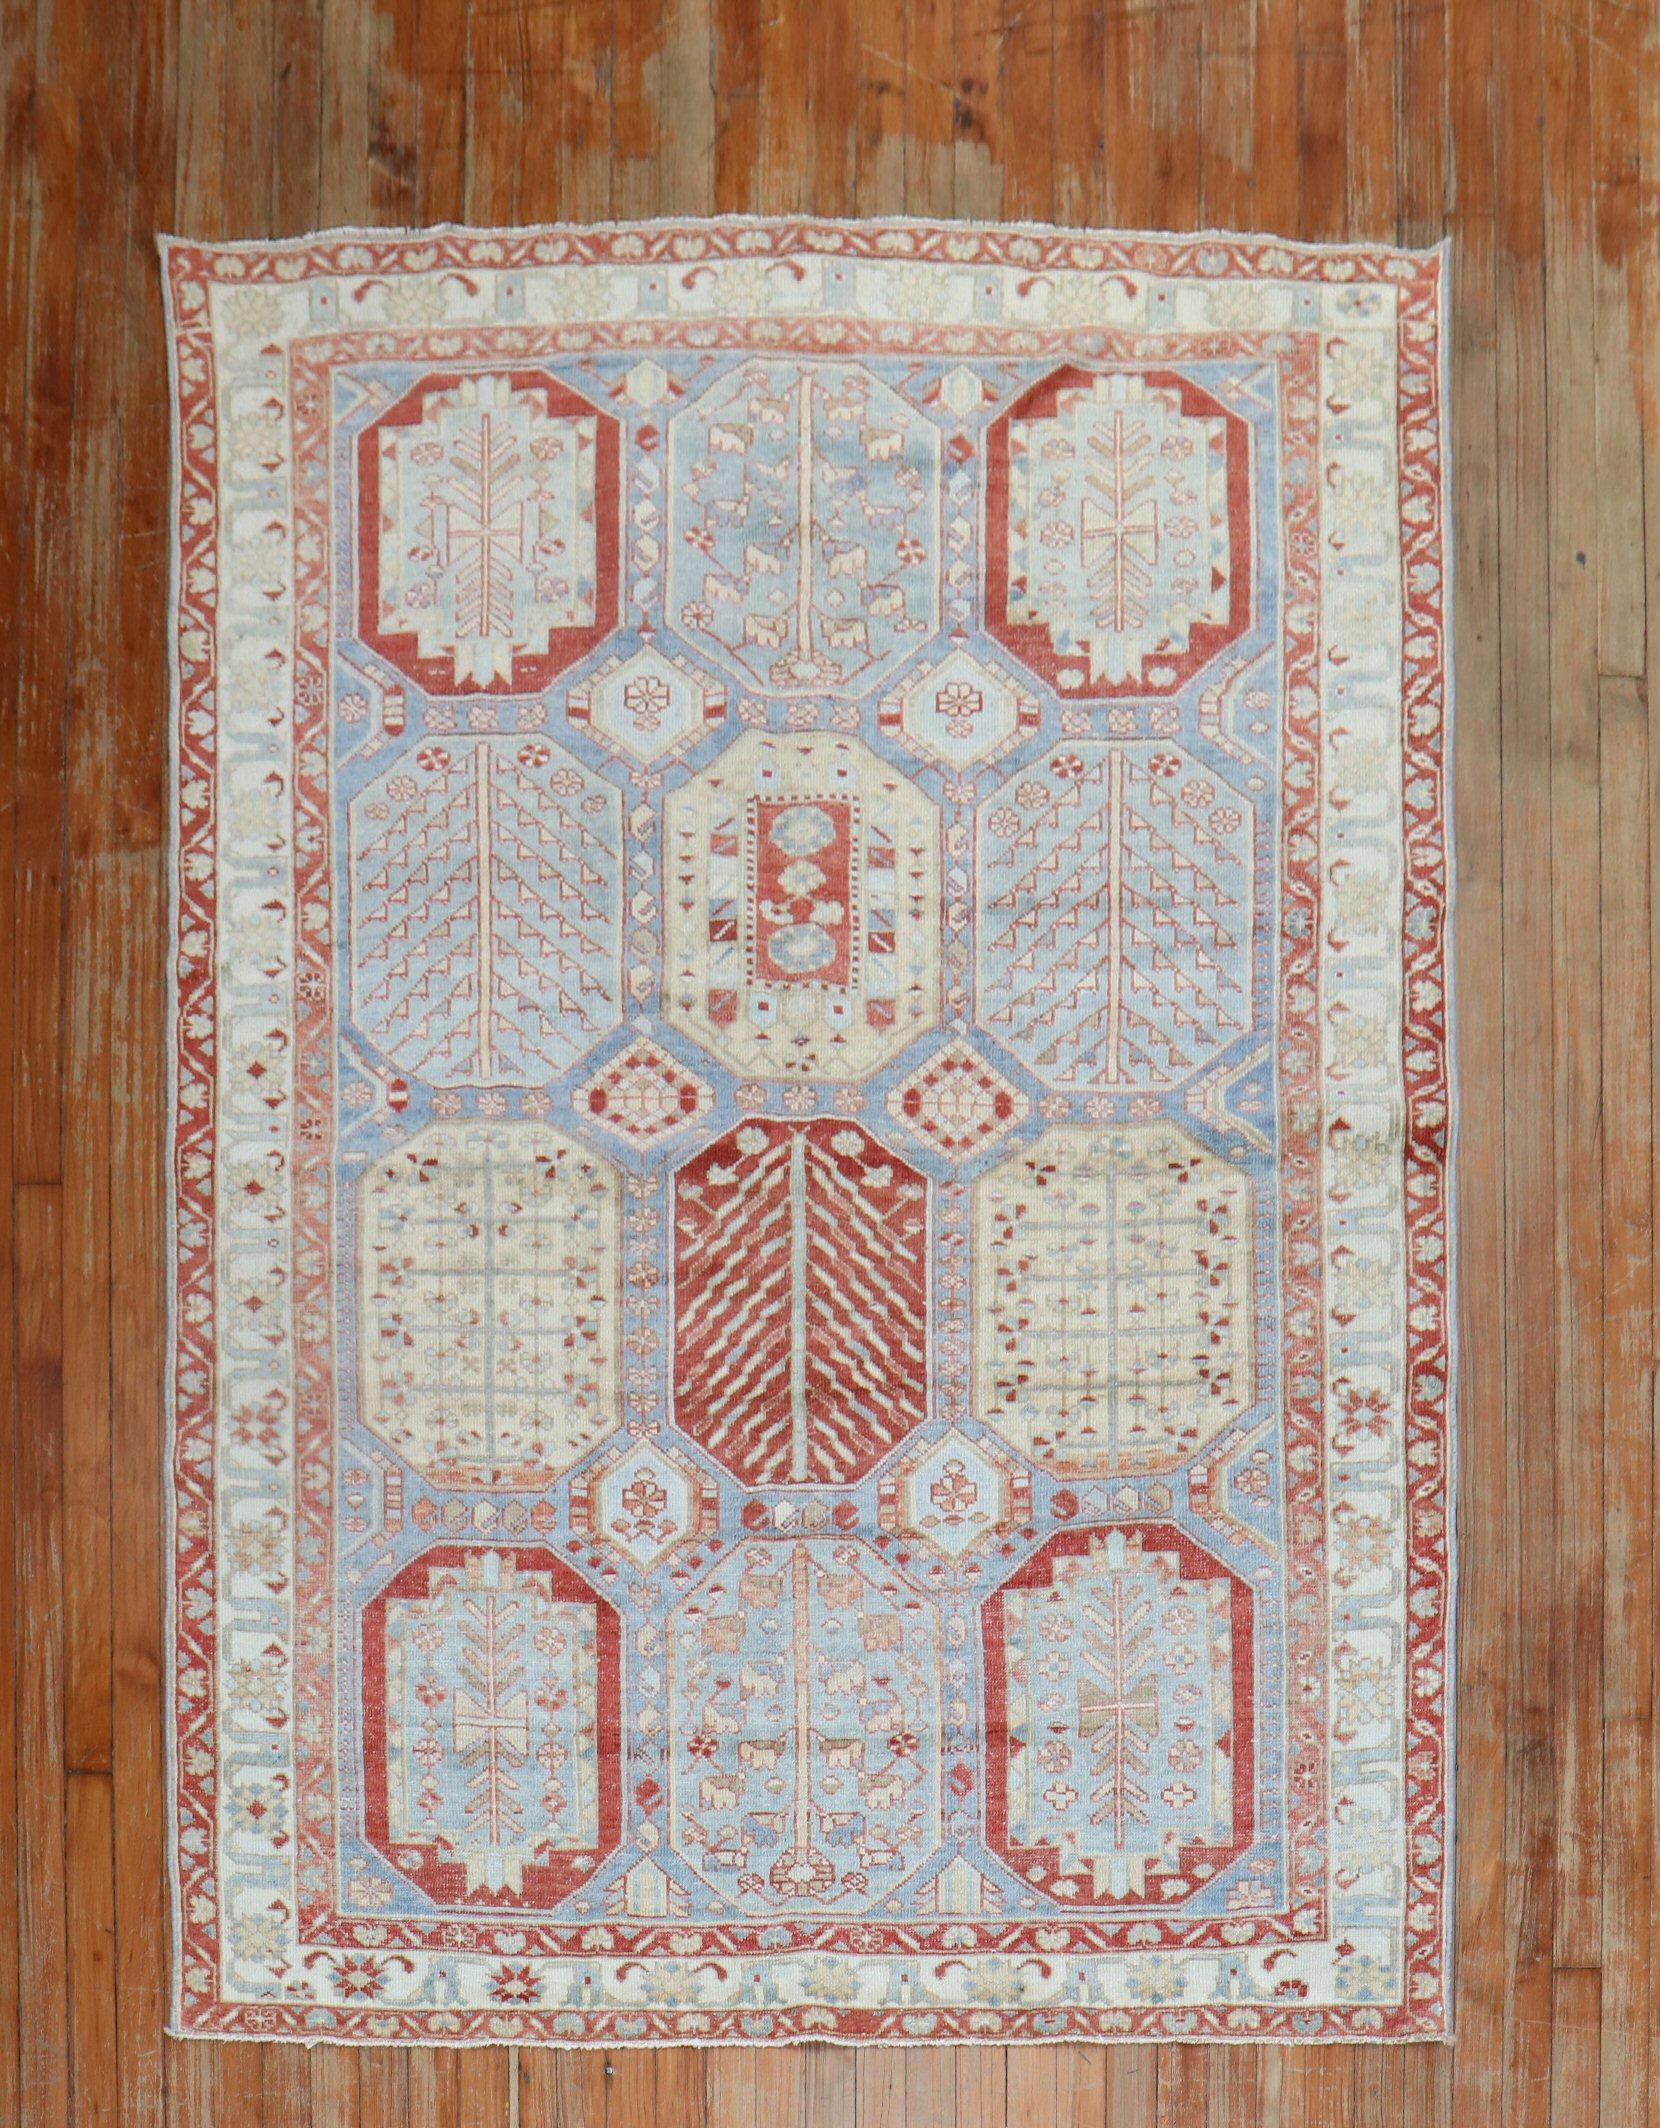 A large scale sky blue ground Persian Bakhtiari square intermediate size rug from the 1940s

Measures: 4'11